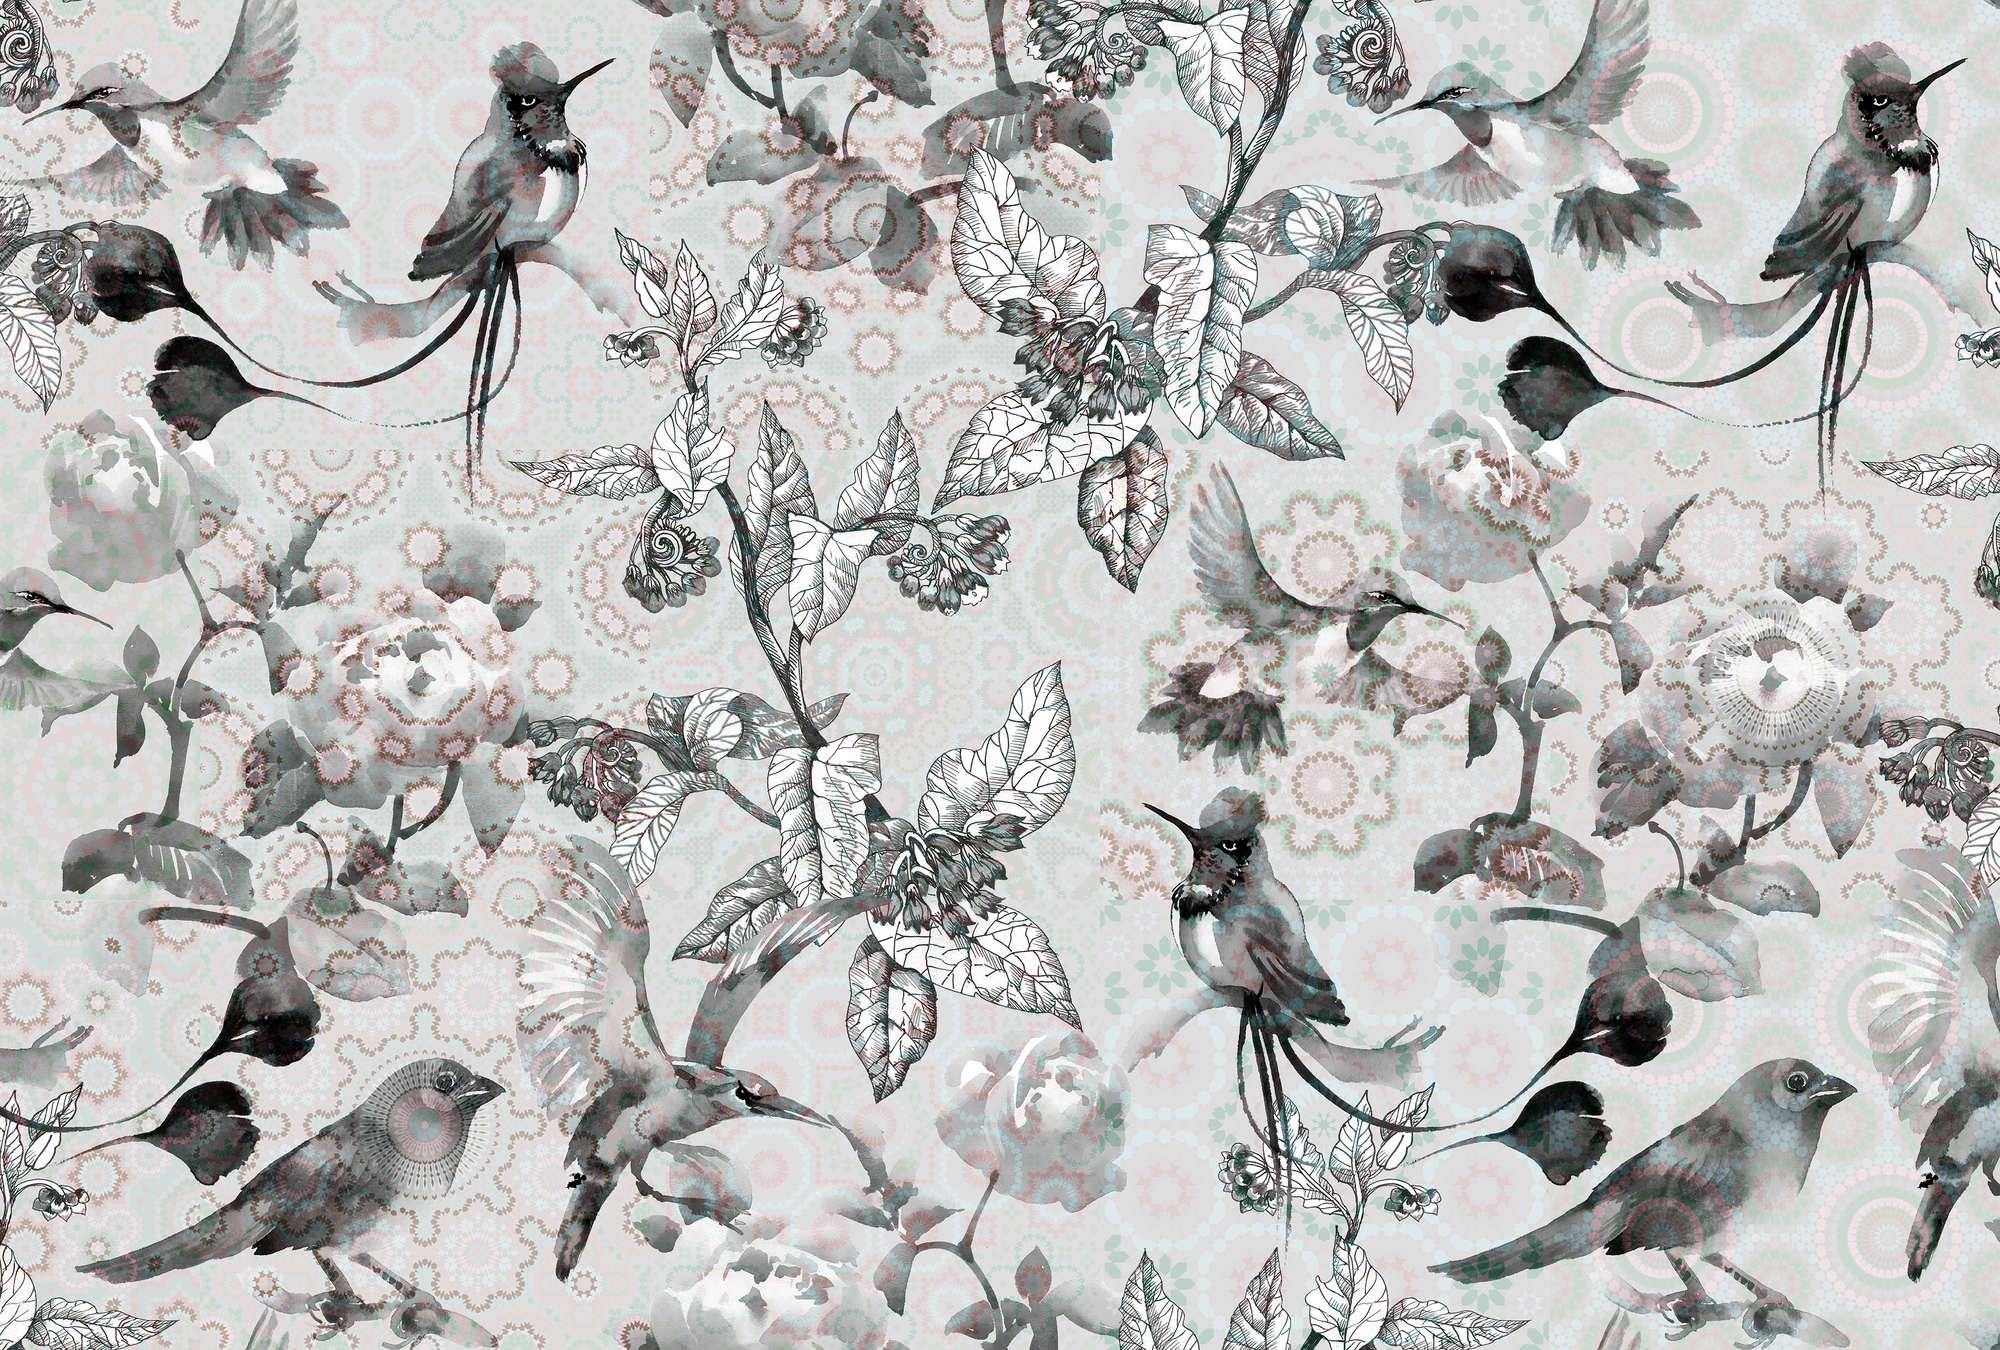             Photo wallpaper nature design in collage style - grey, white
        